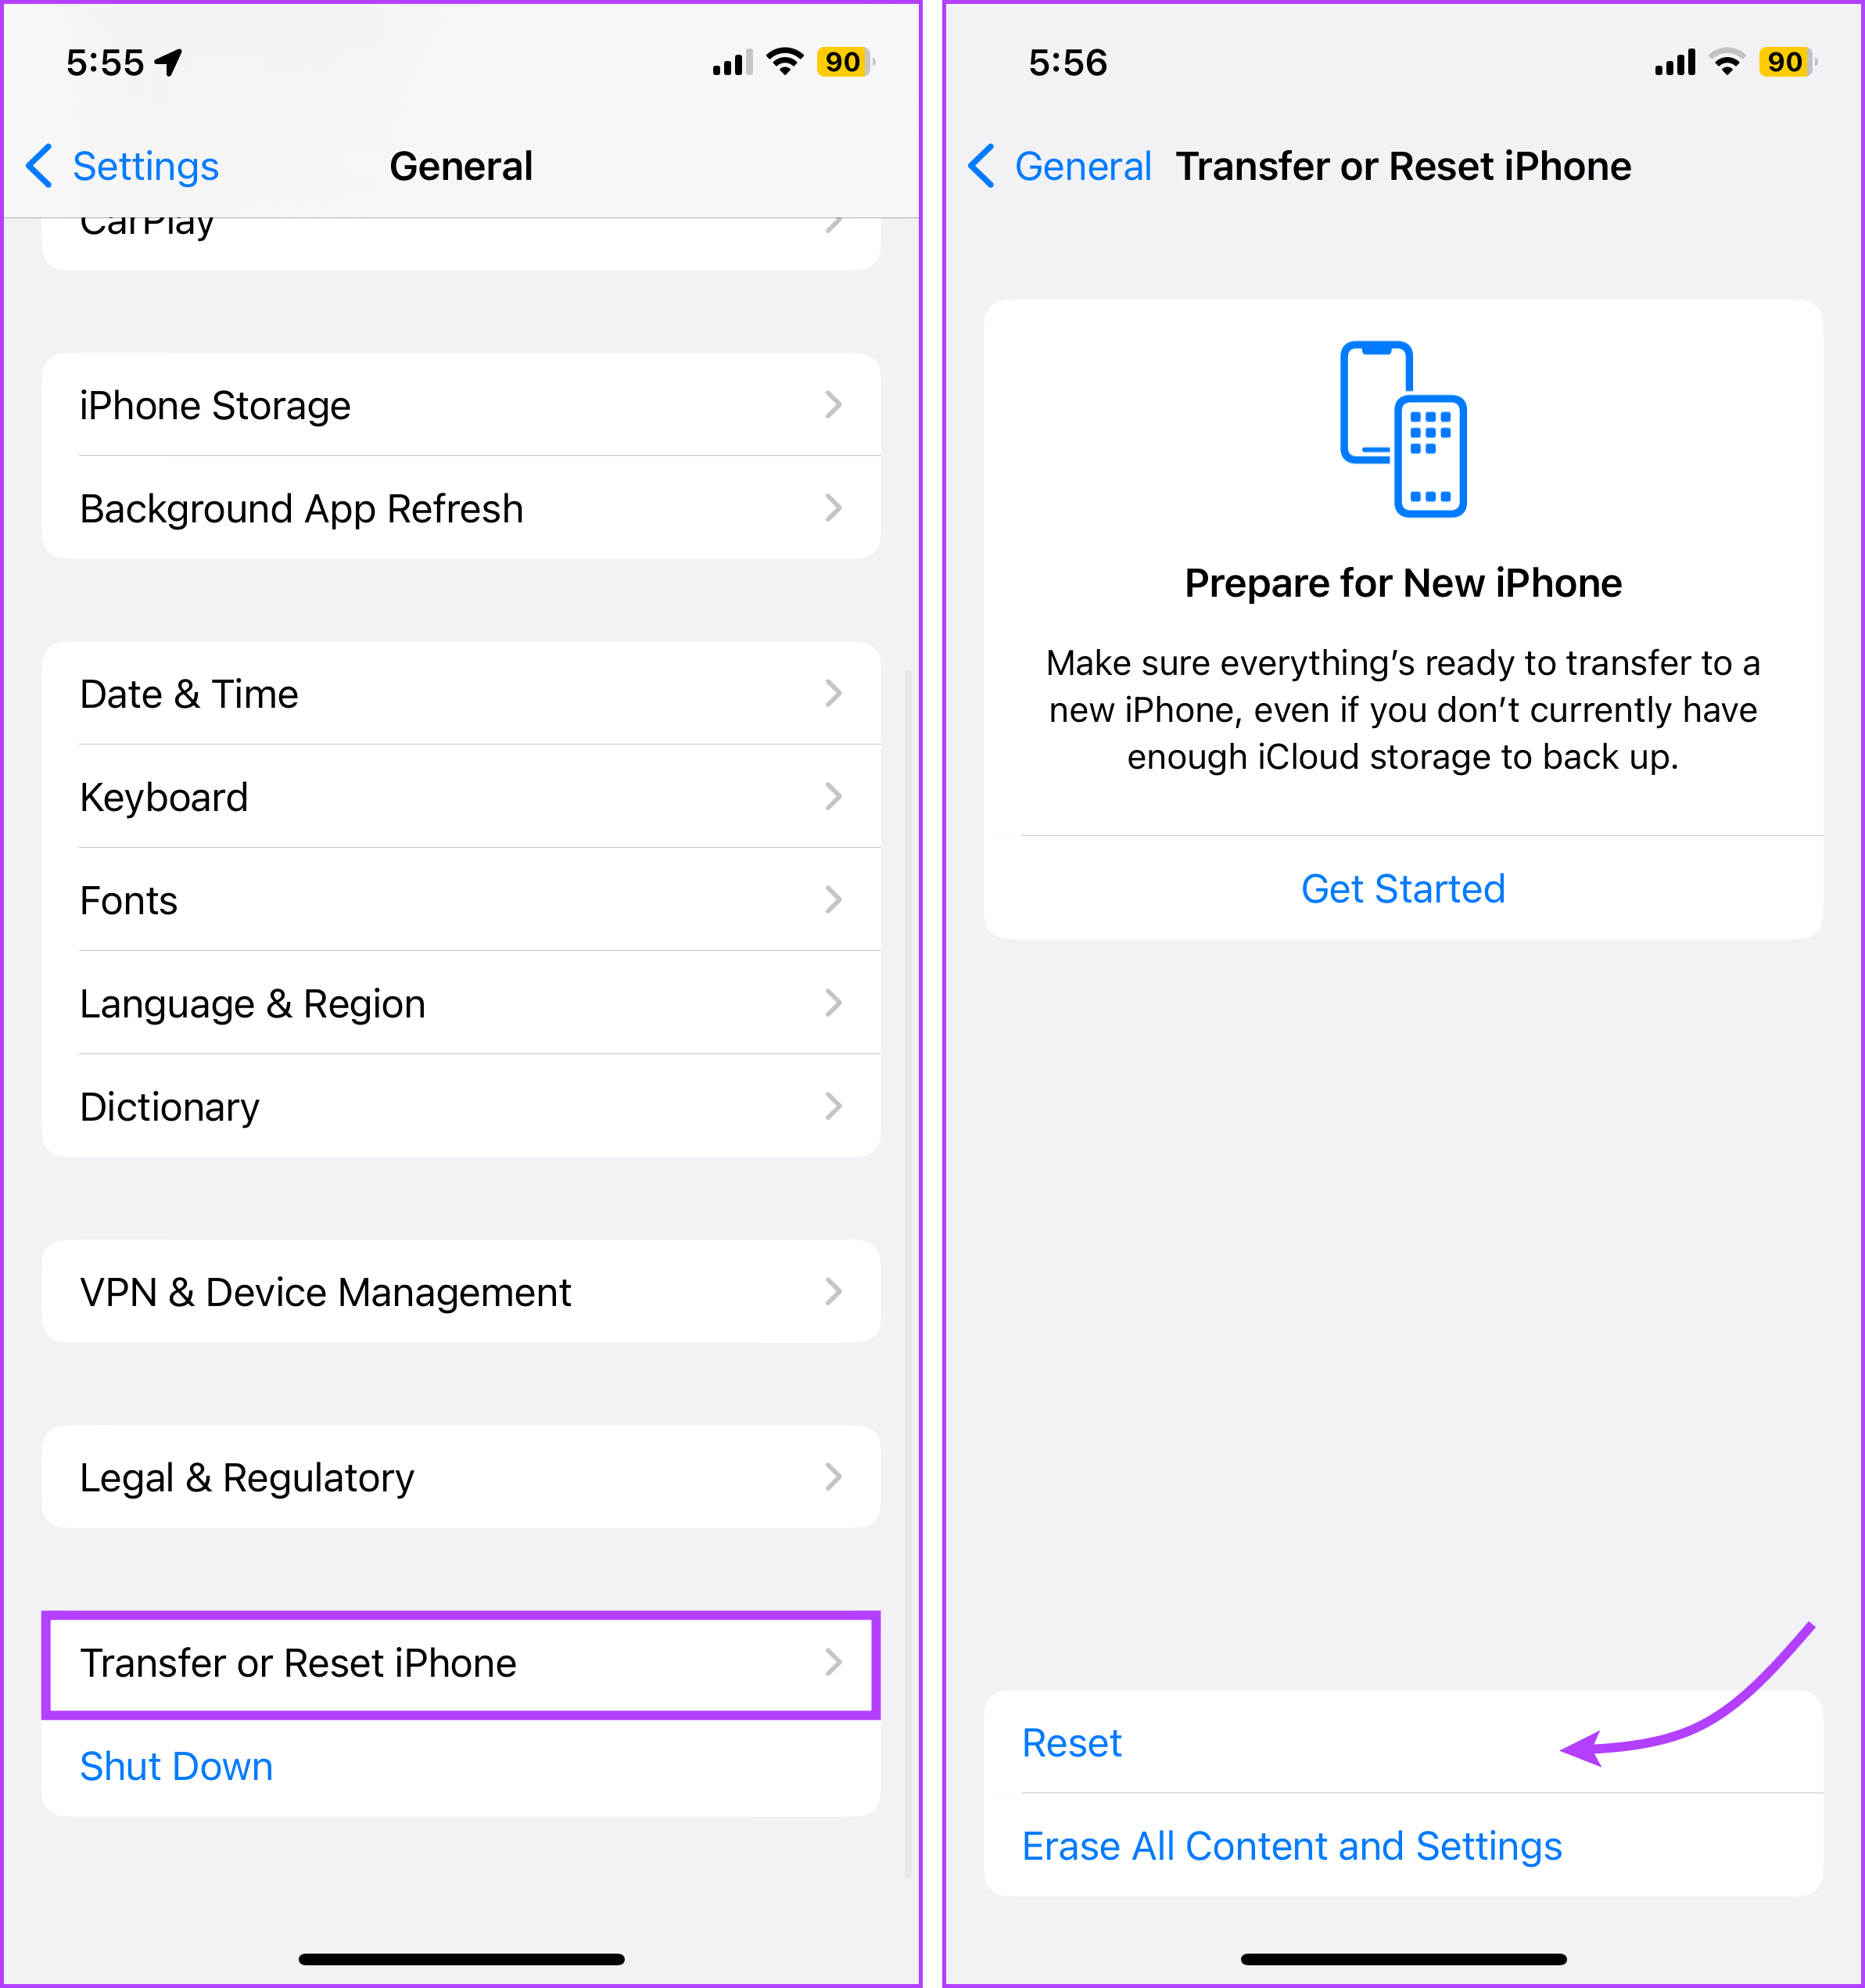 Tap Transfer or Reset iPhone and then Reset